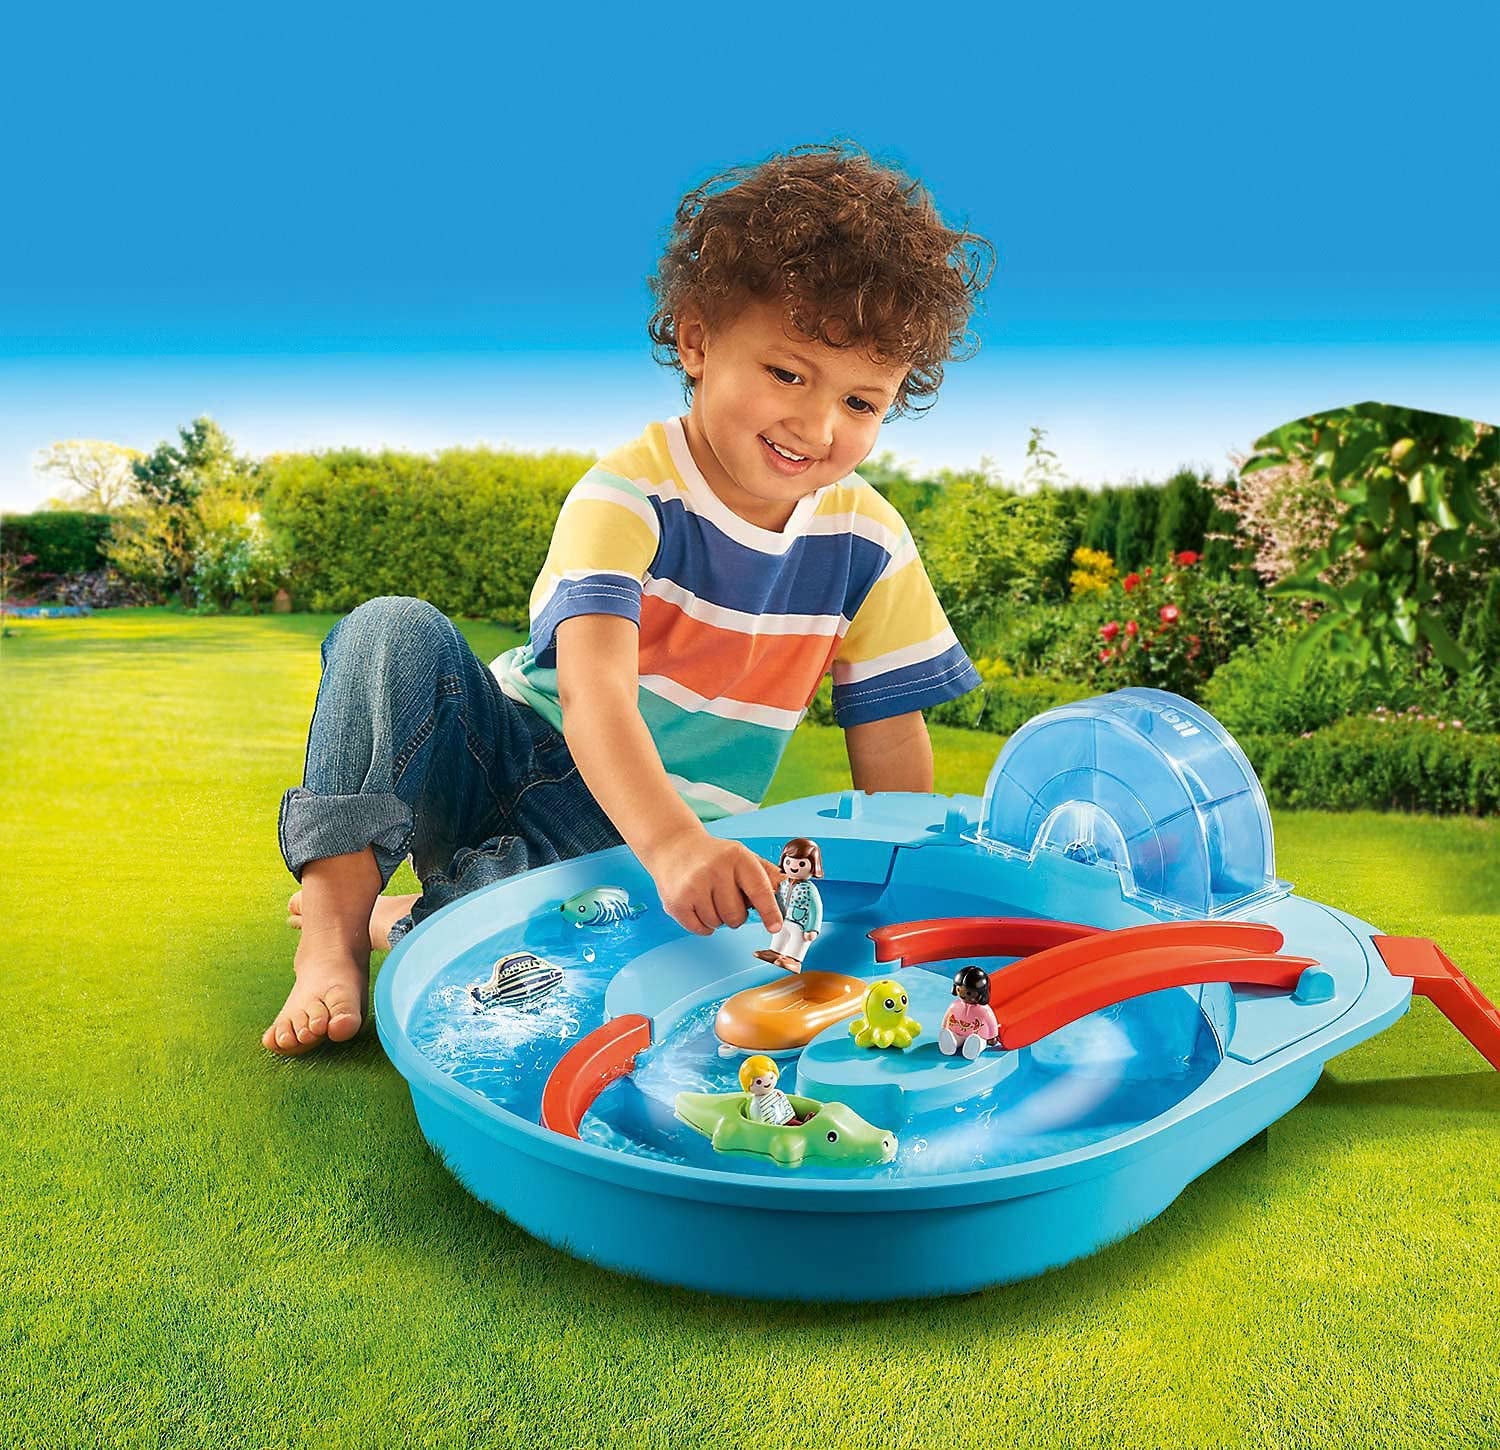 24 Kid's Water Toys & Activities That'll Make A Splash